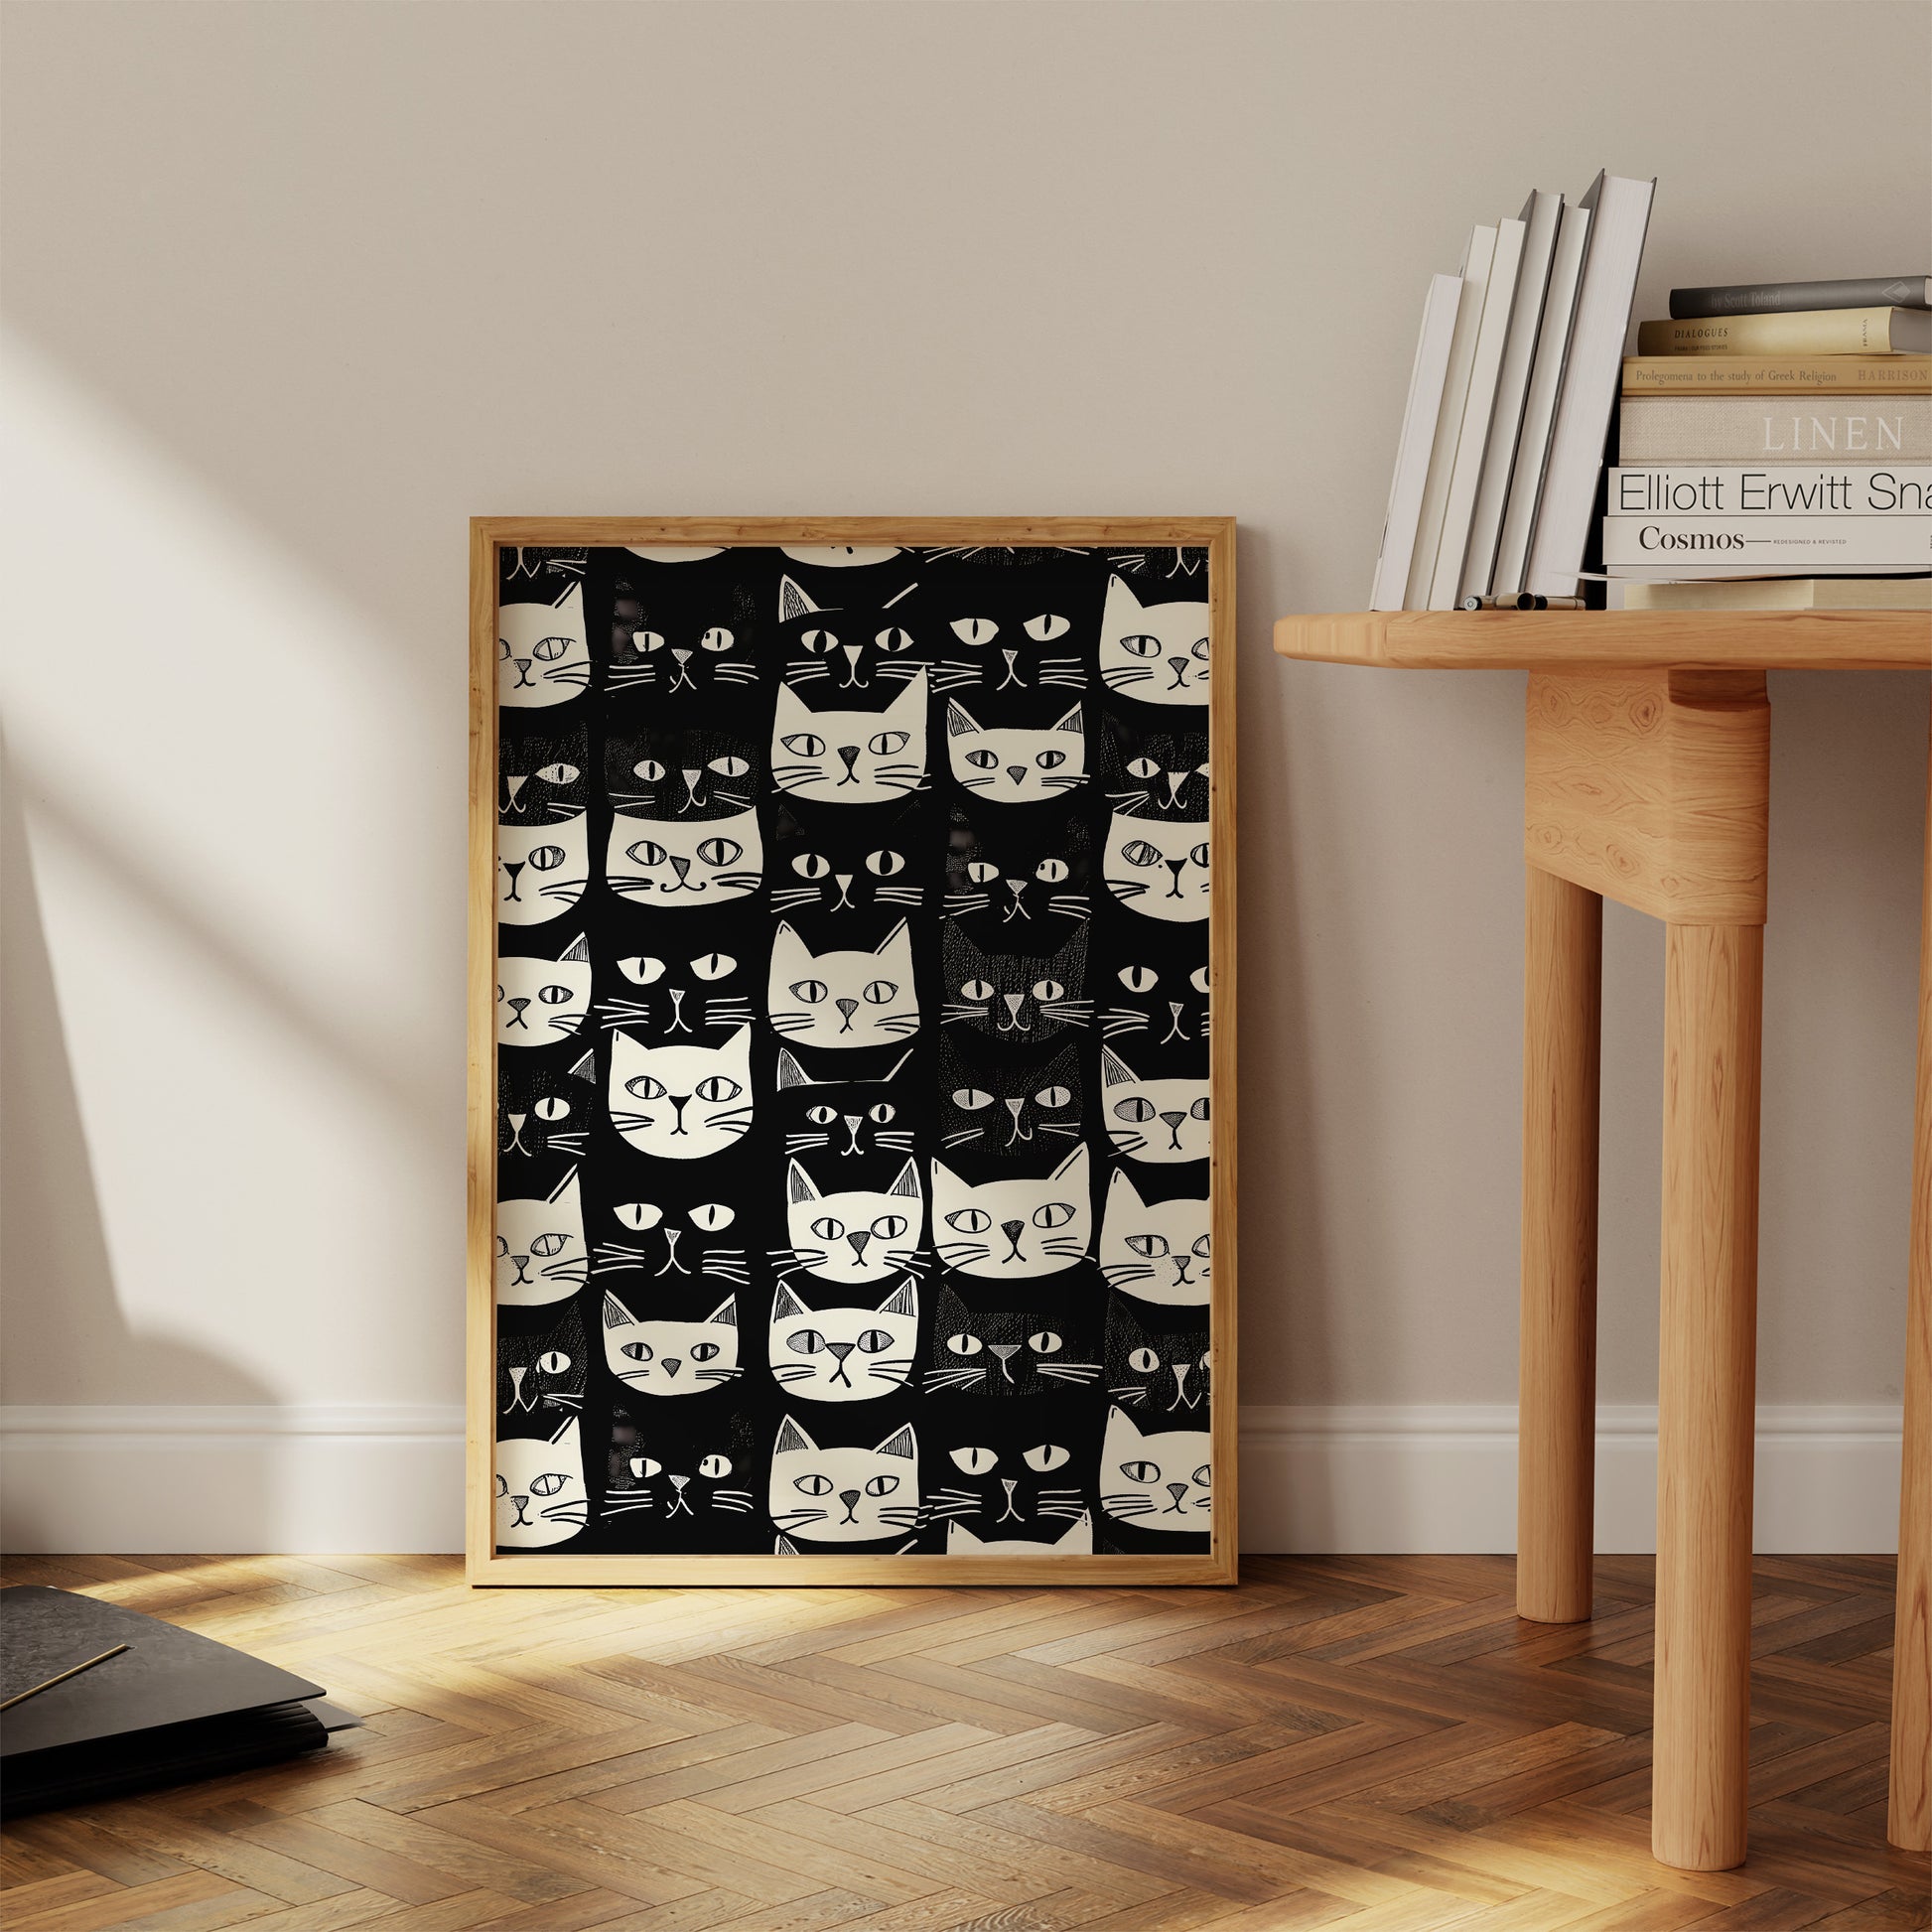 A radiator cover with a black and white cat design in a cozy room corner.